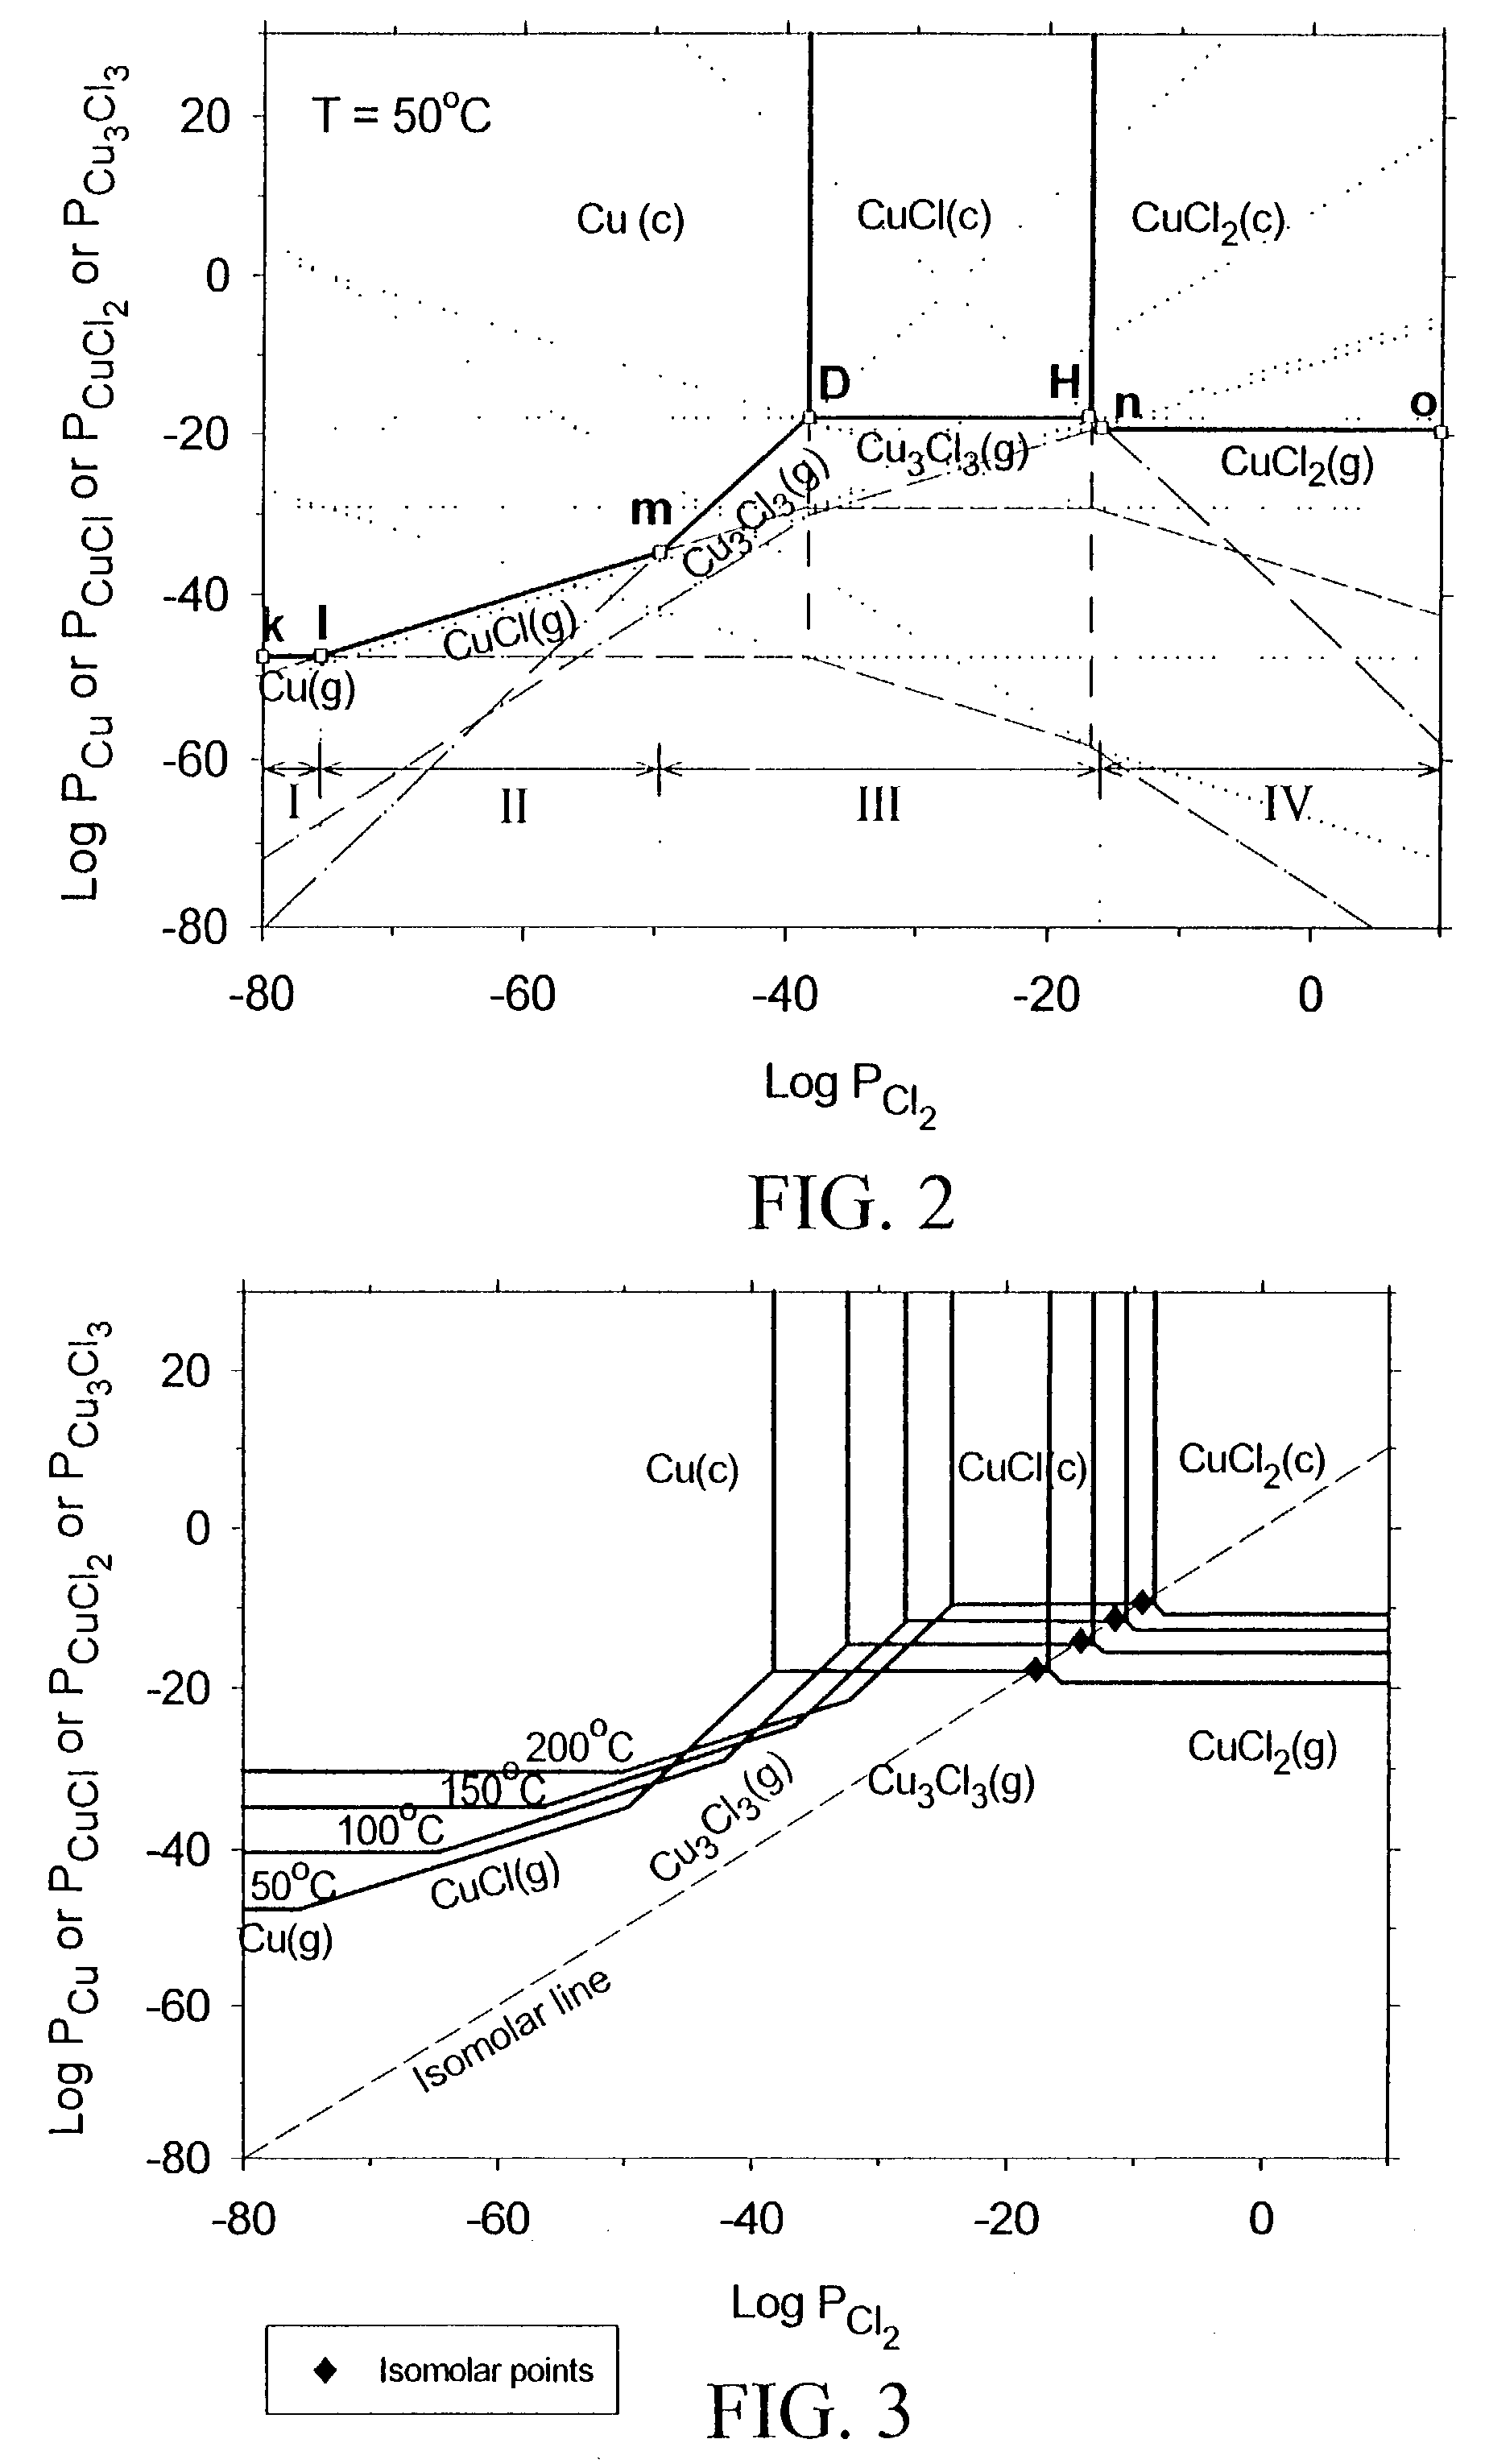 Process for low temperature, dry etching, and dry planarization of copper